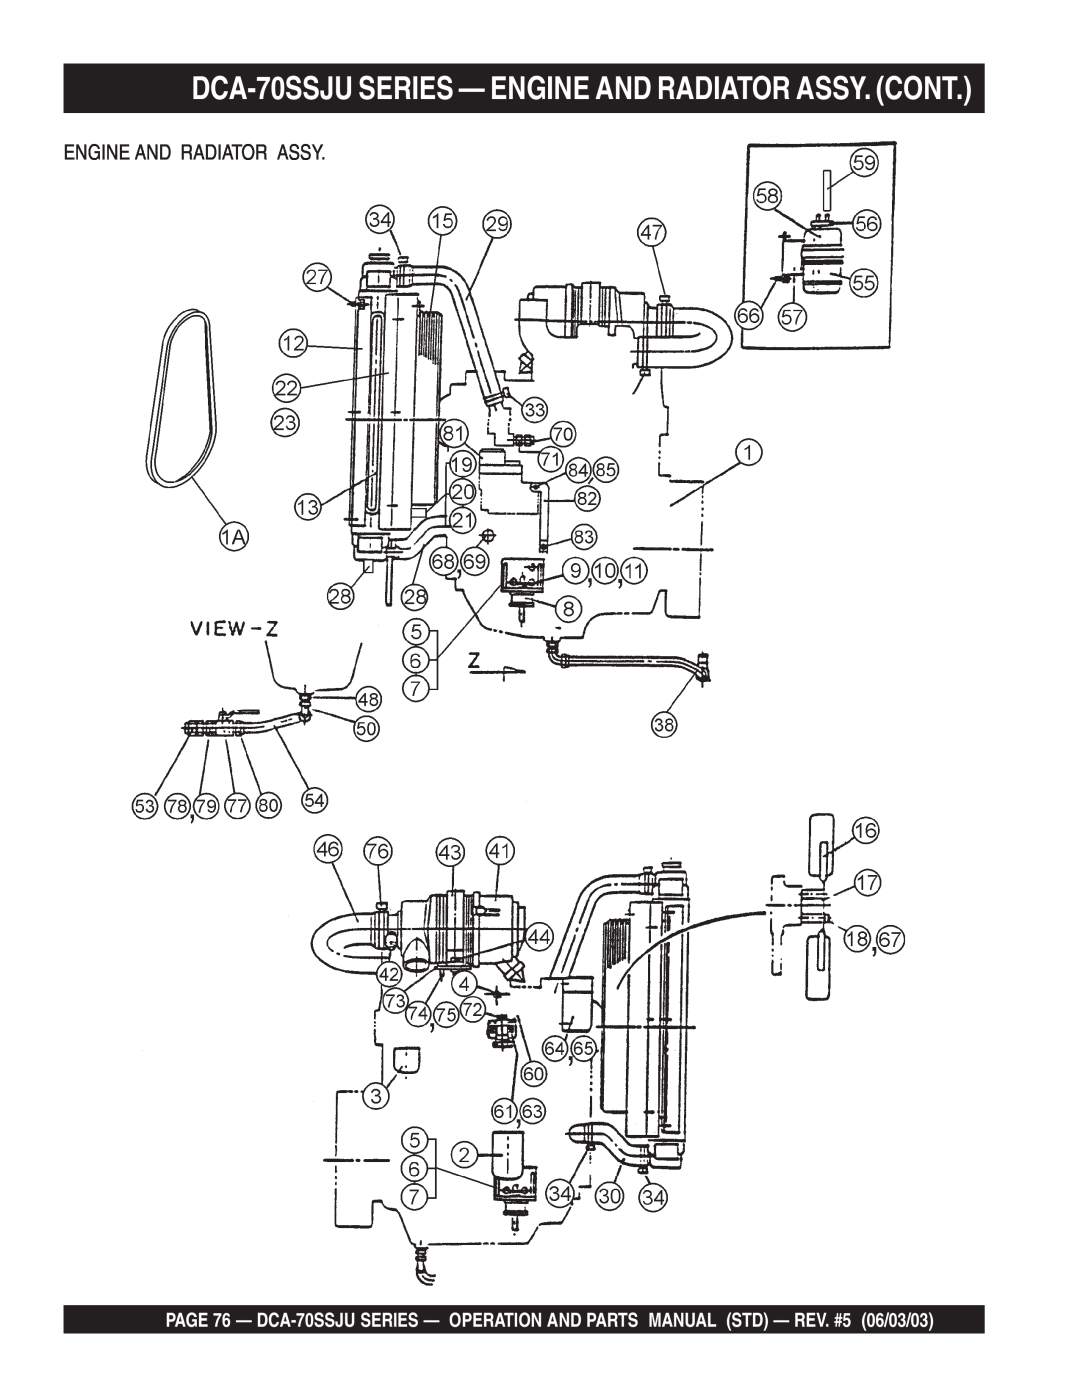 Multiquip operation manual DCA-70SSJUSERIES - ENGINE AND RADIATOR ASSY. CONT 